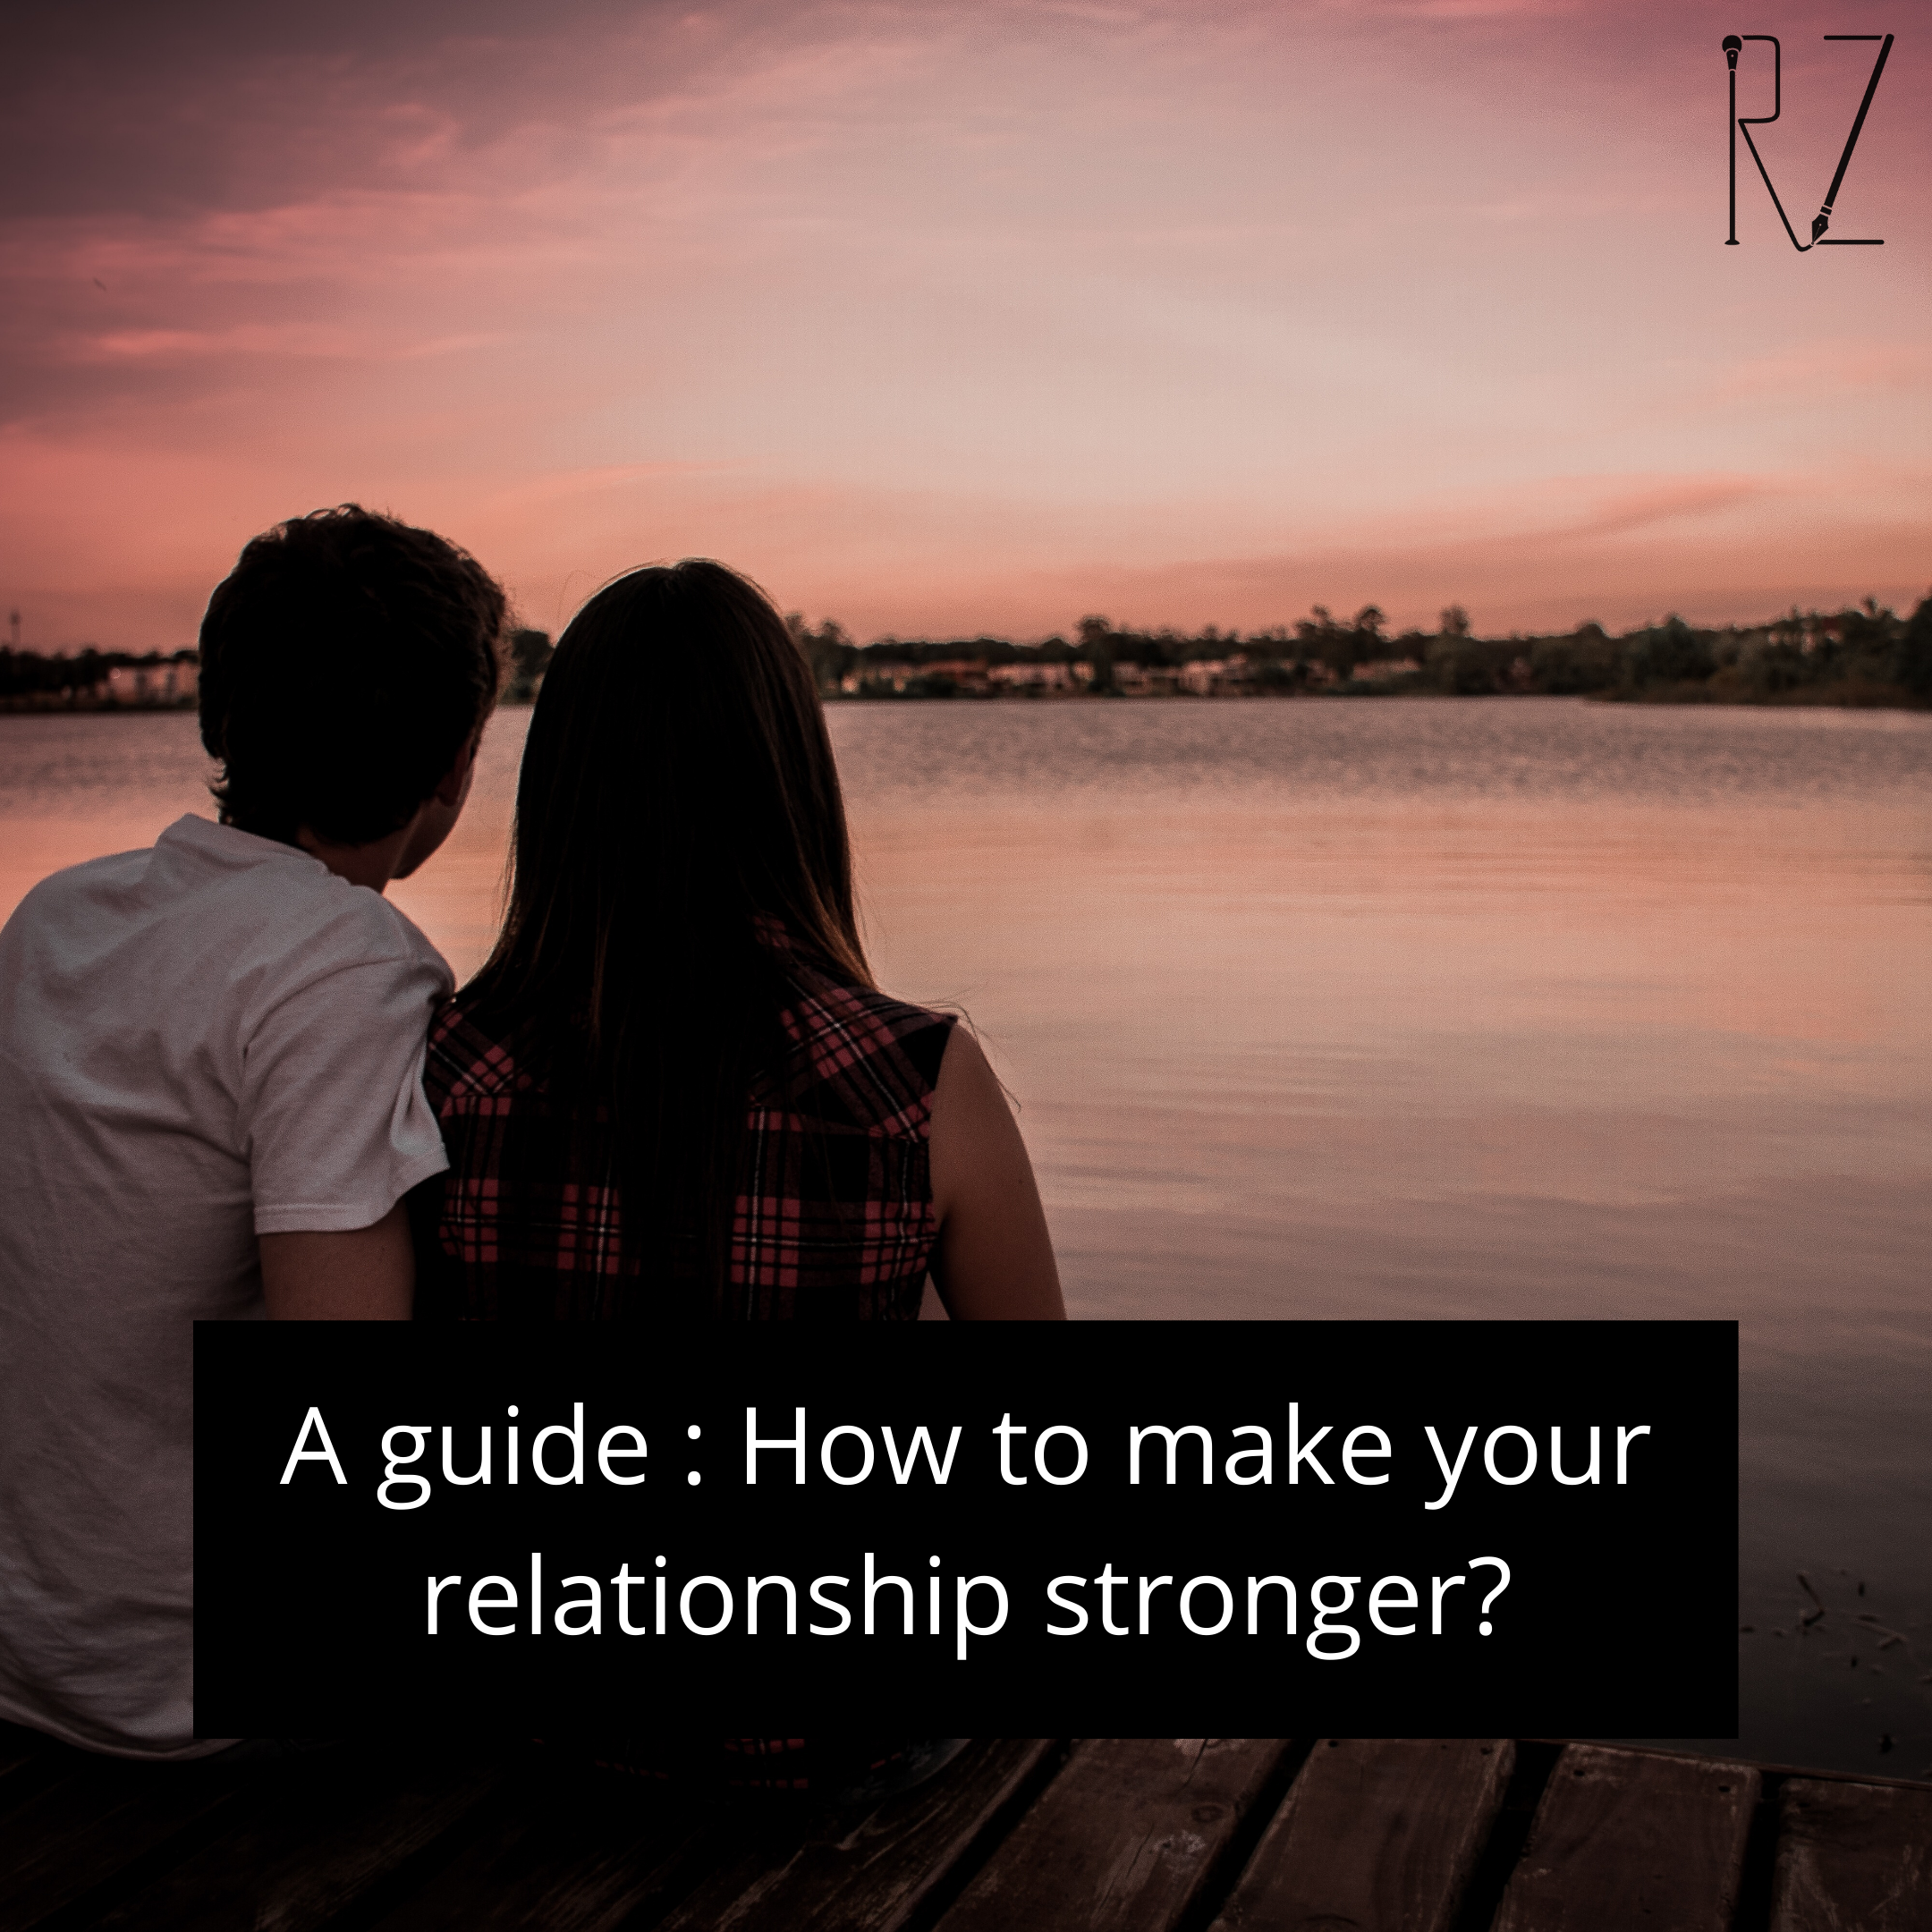 A precise guide to making your relationship stronger.